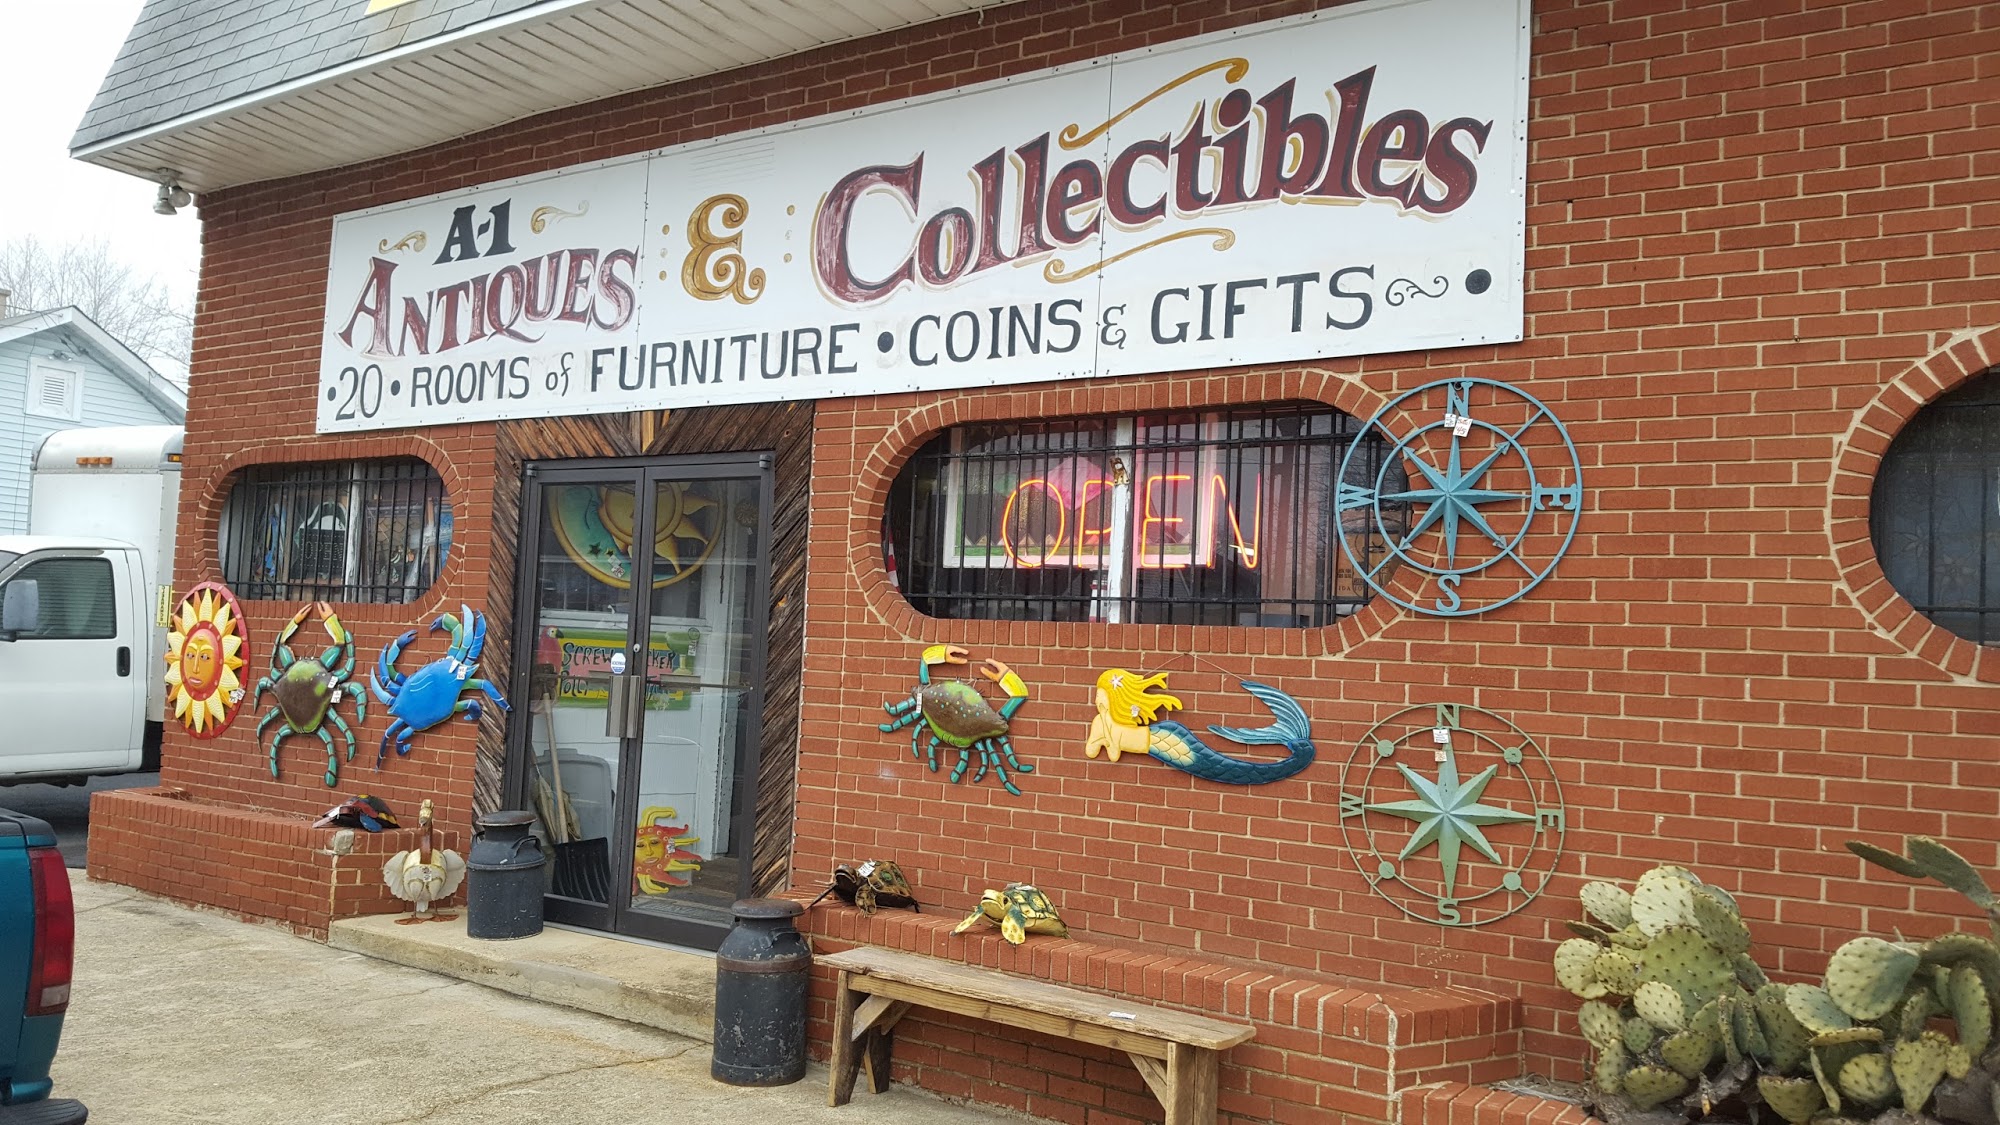 A-1 Antiques Collectibles